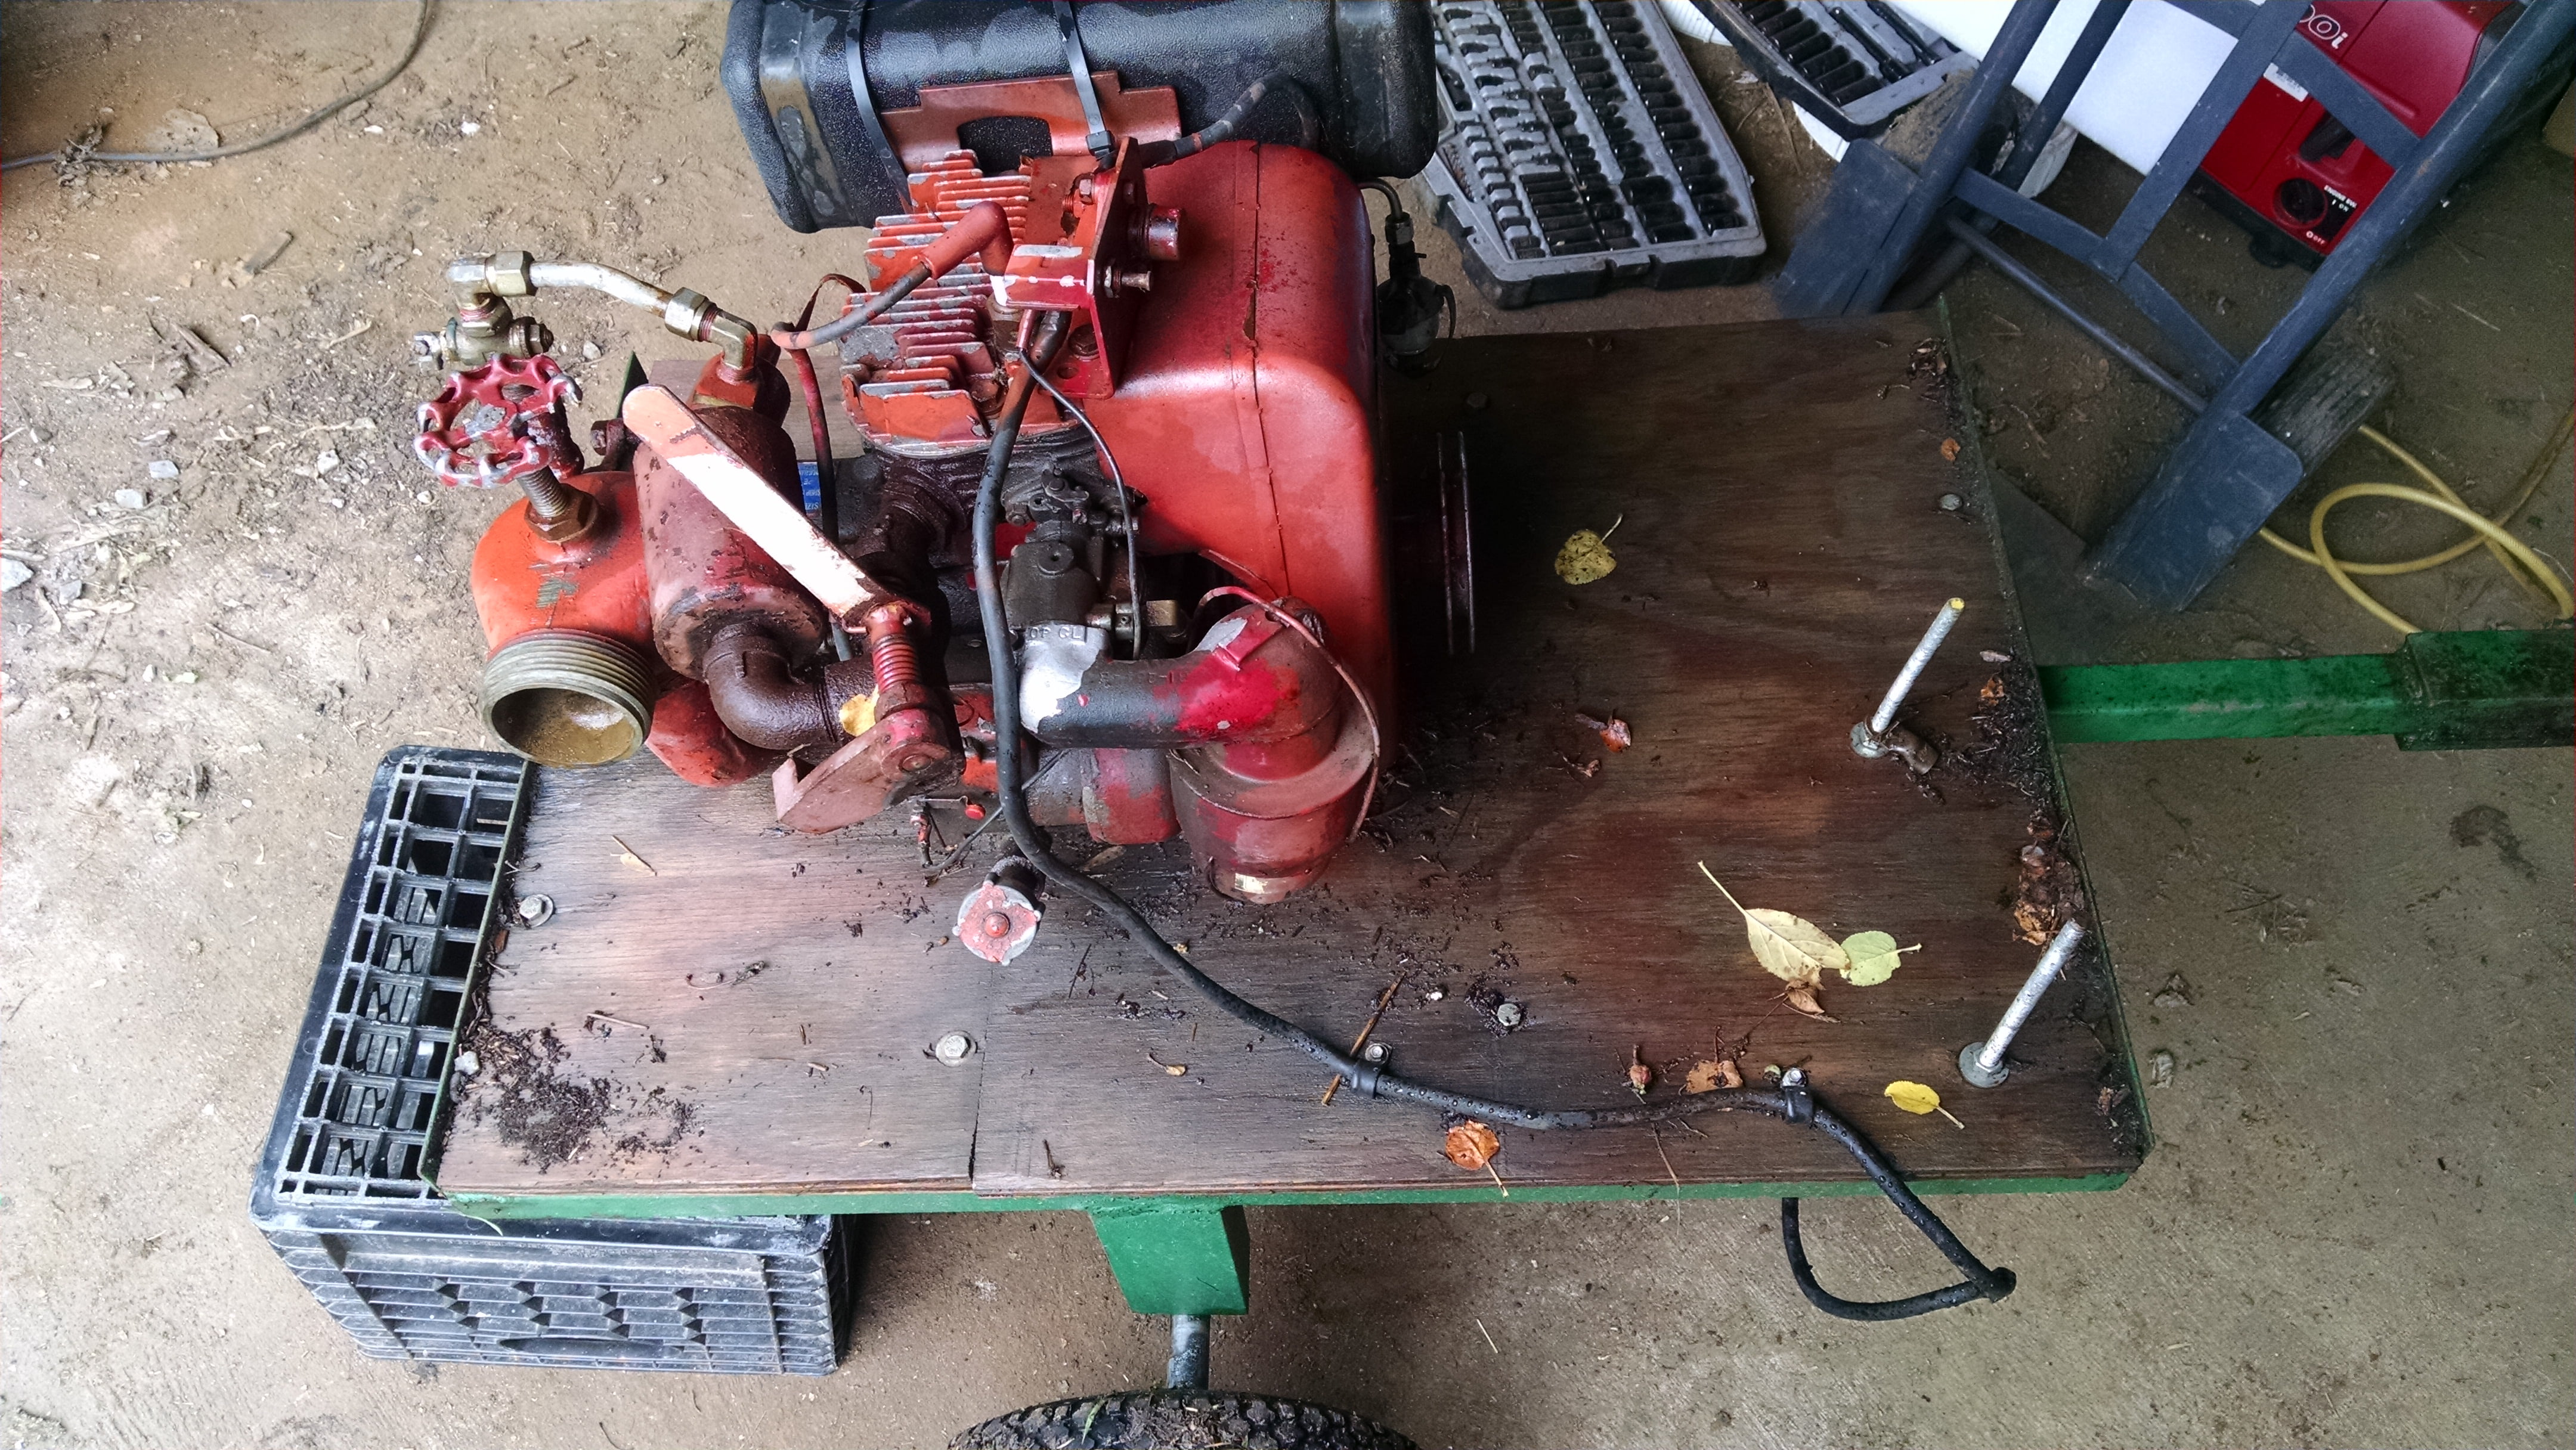 Starting with this cart.  I bought this old fire pump a few years ago, but unfortunately is really only effective as a transfer pump and I needed something that could pull more suction.  Anyone need a nice old Wisconsin engine?